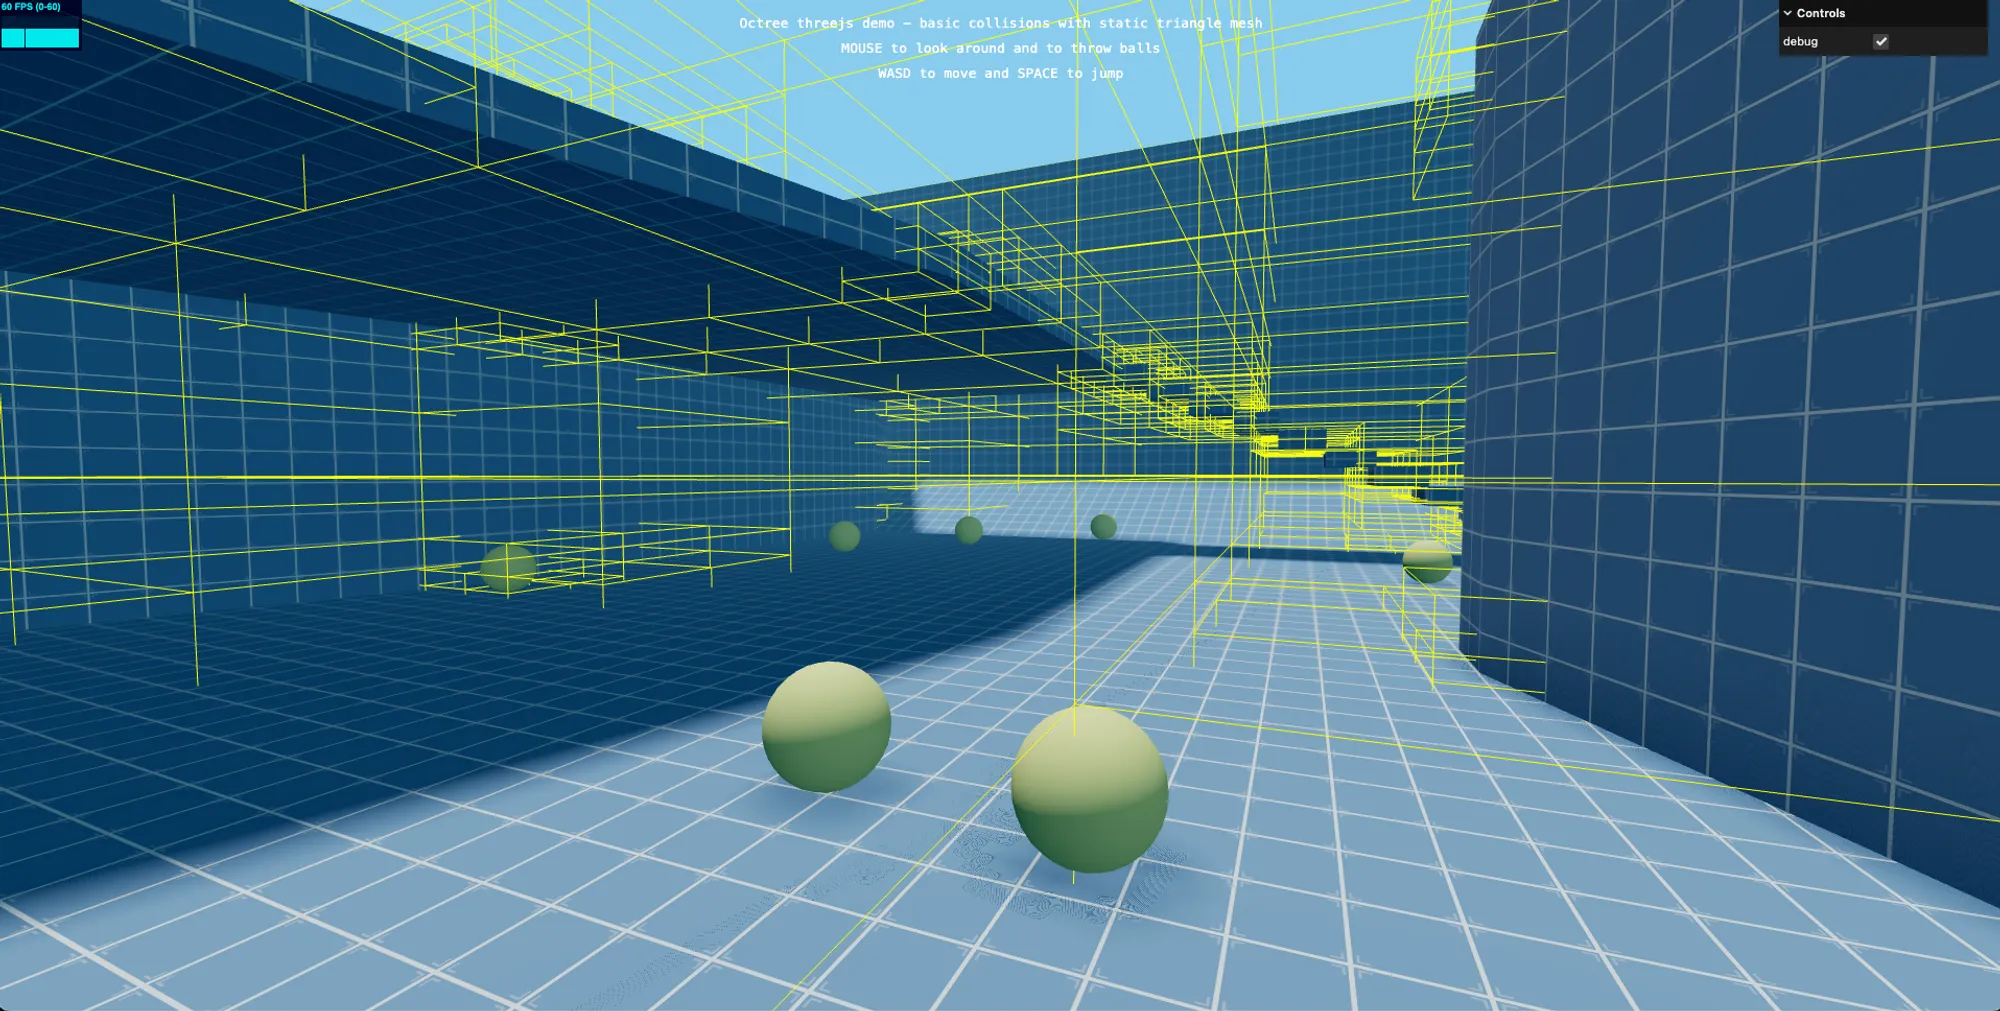 xample of an octree in Three.js. Clicking sends a ball flying, which bounces upon colliding with another model.
https://threejs.org/examples/games_fps.html